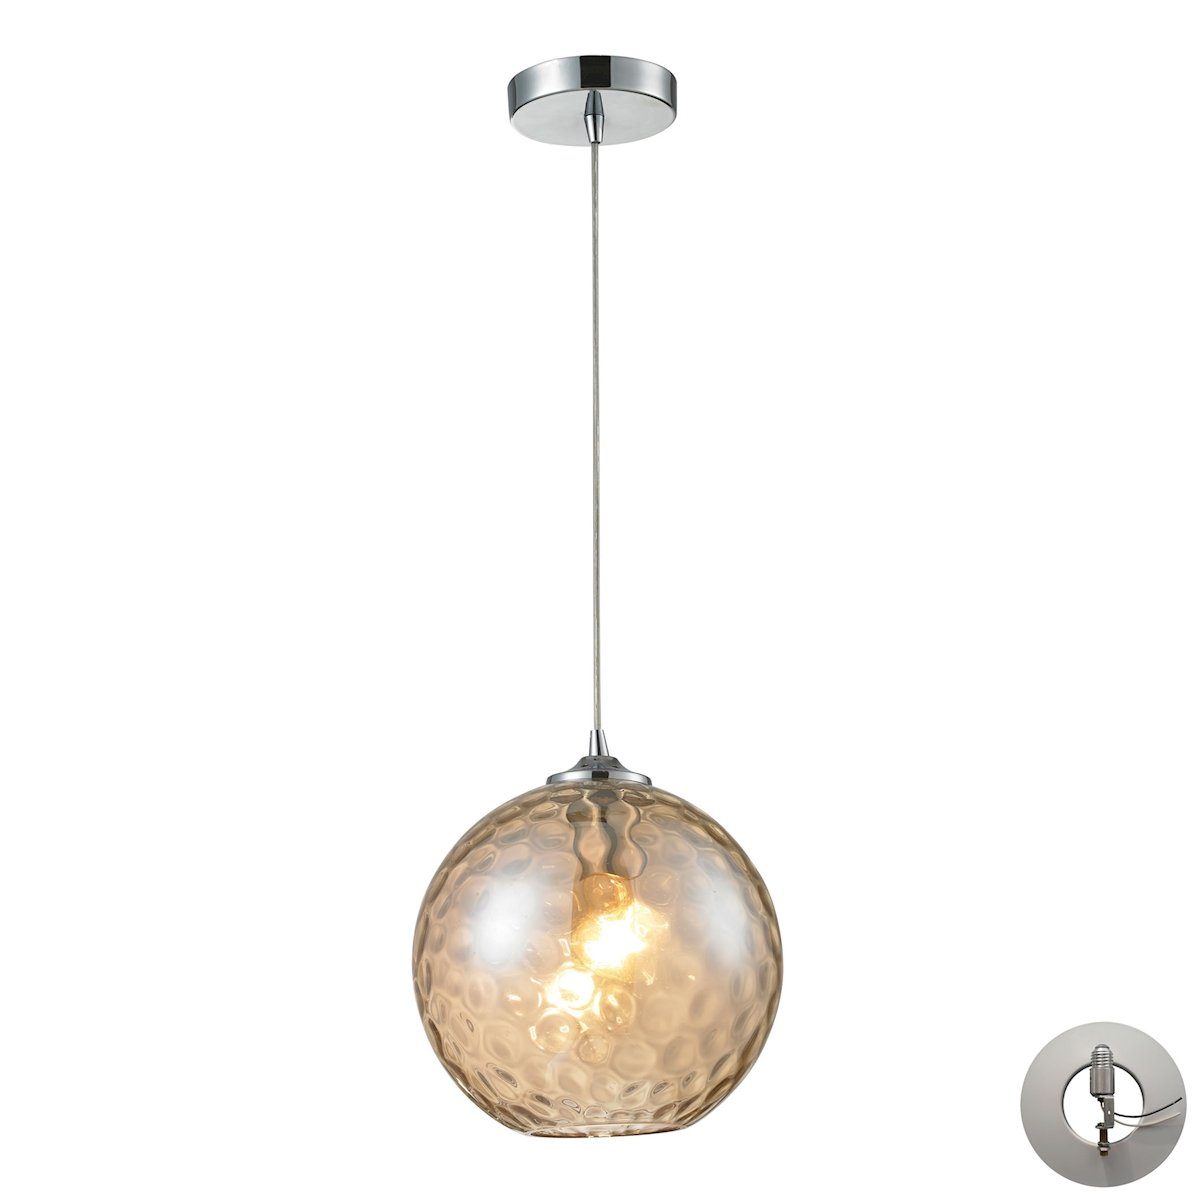 Watersphere 1 Light Pendant In Polished Chrome And Champagne Glass - Includes Recessed Lighting Kit Ceiling Elk Lighting 